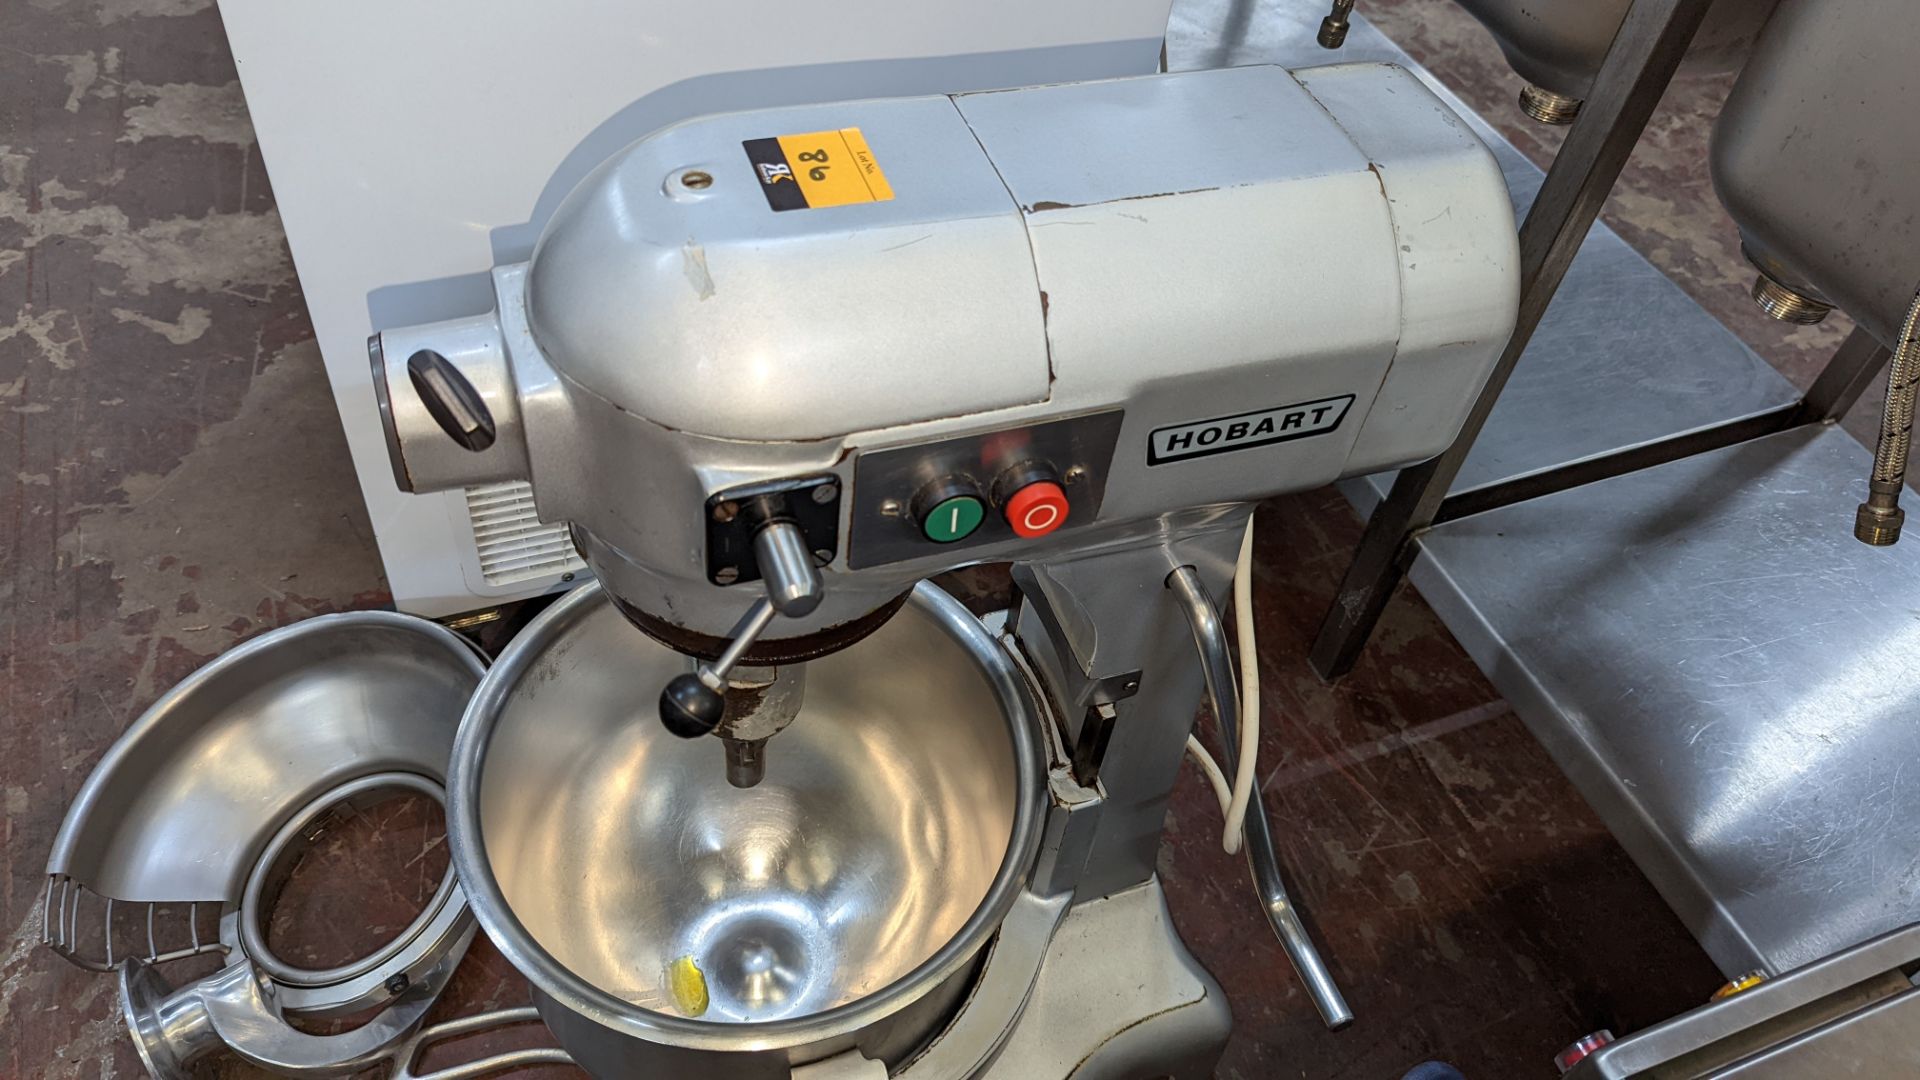 Hobart commercial mixer incorporating removable bowl, guard & 3 assorted paddle/mixer attachments - Image 6 of 11